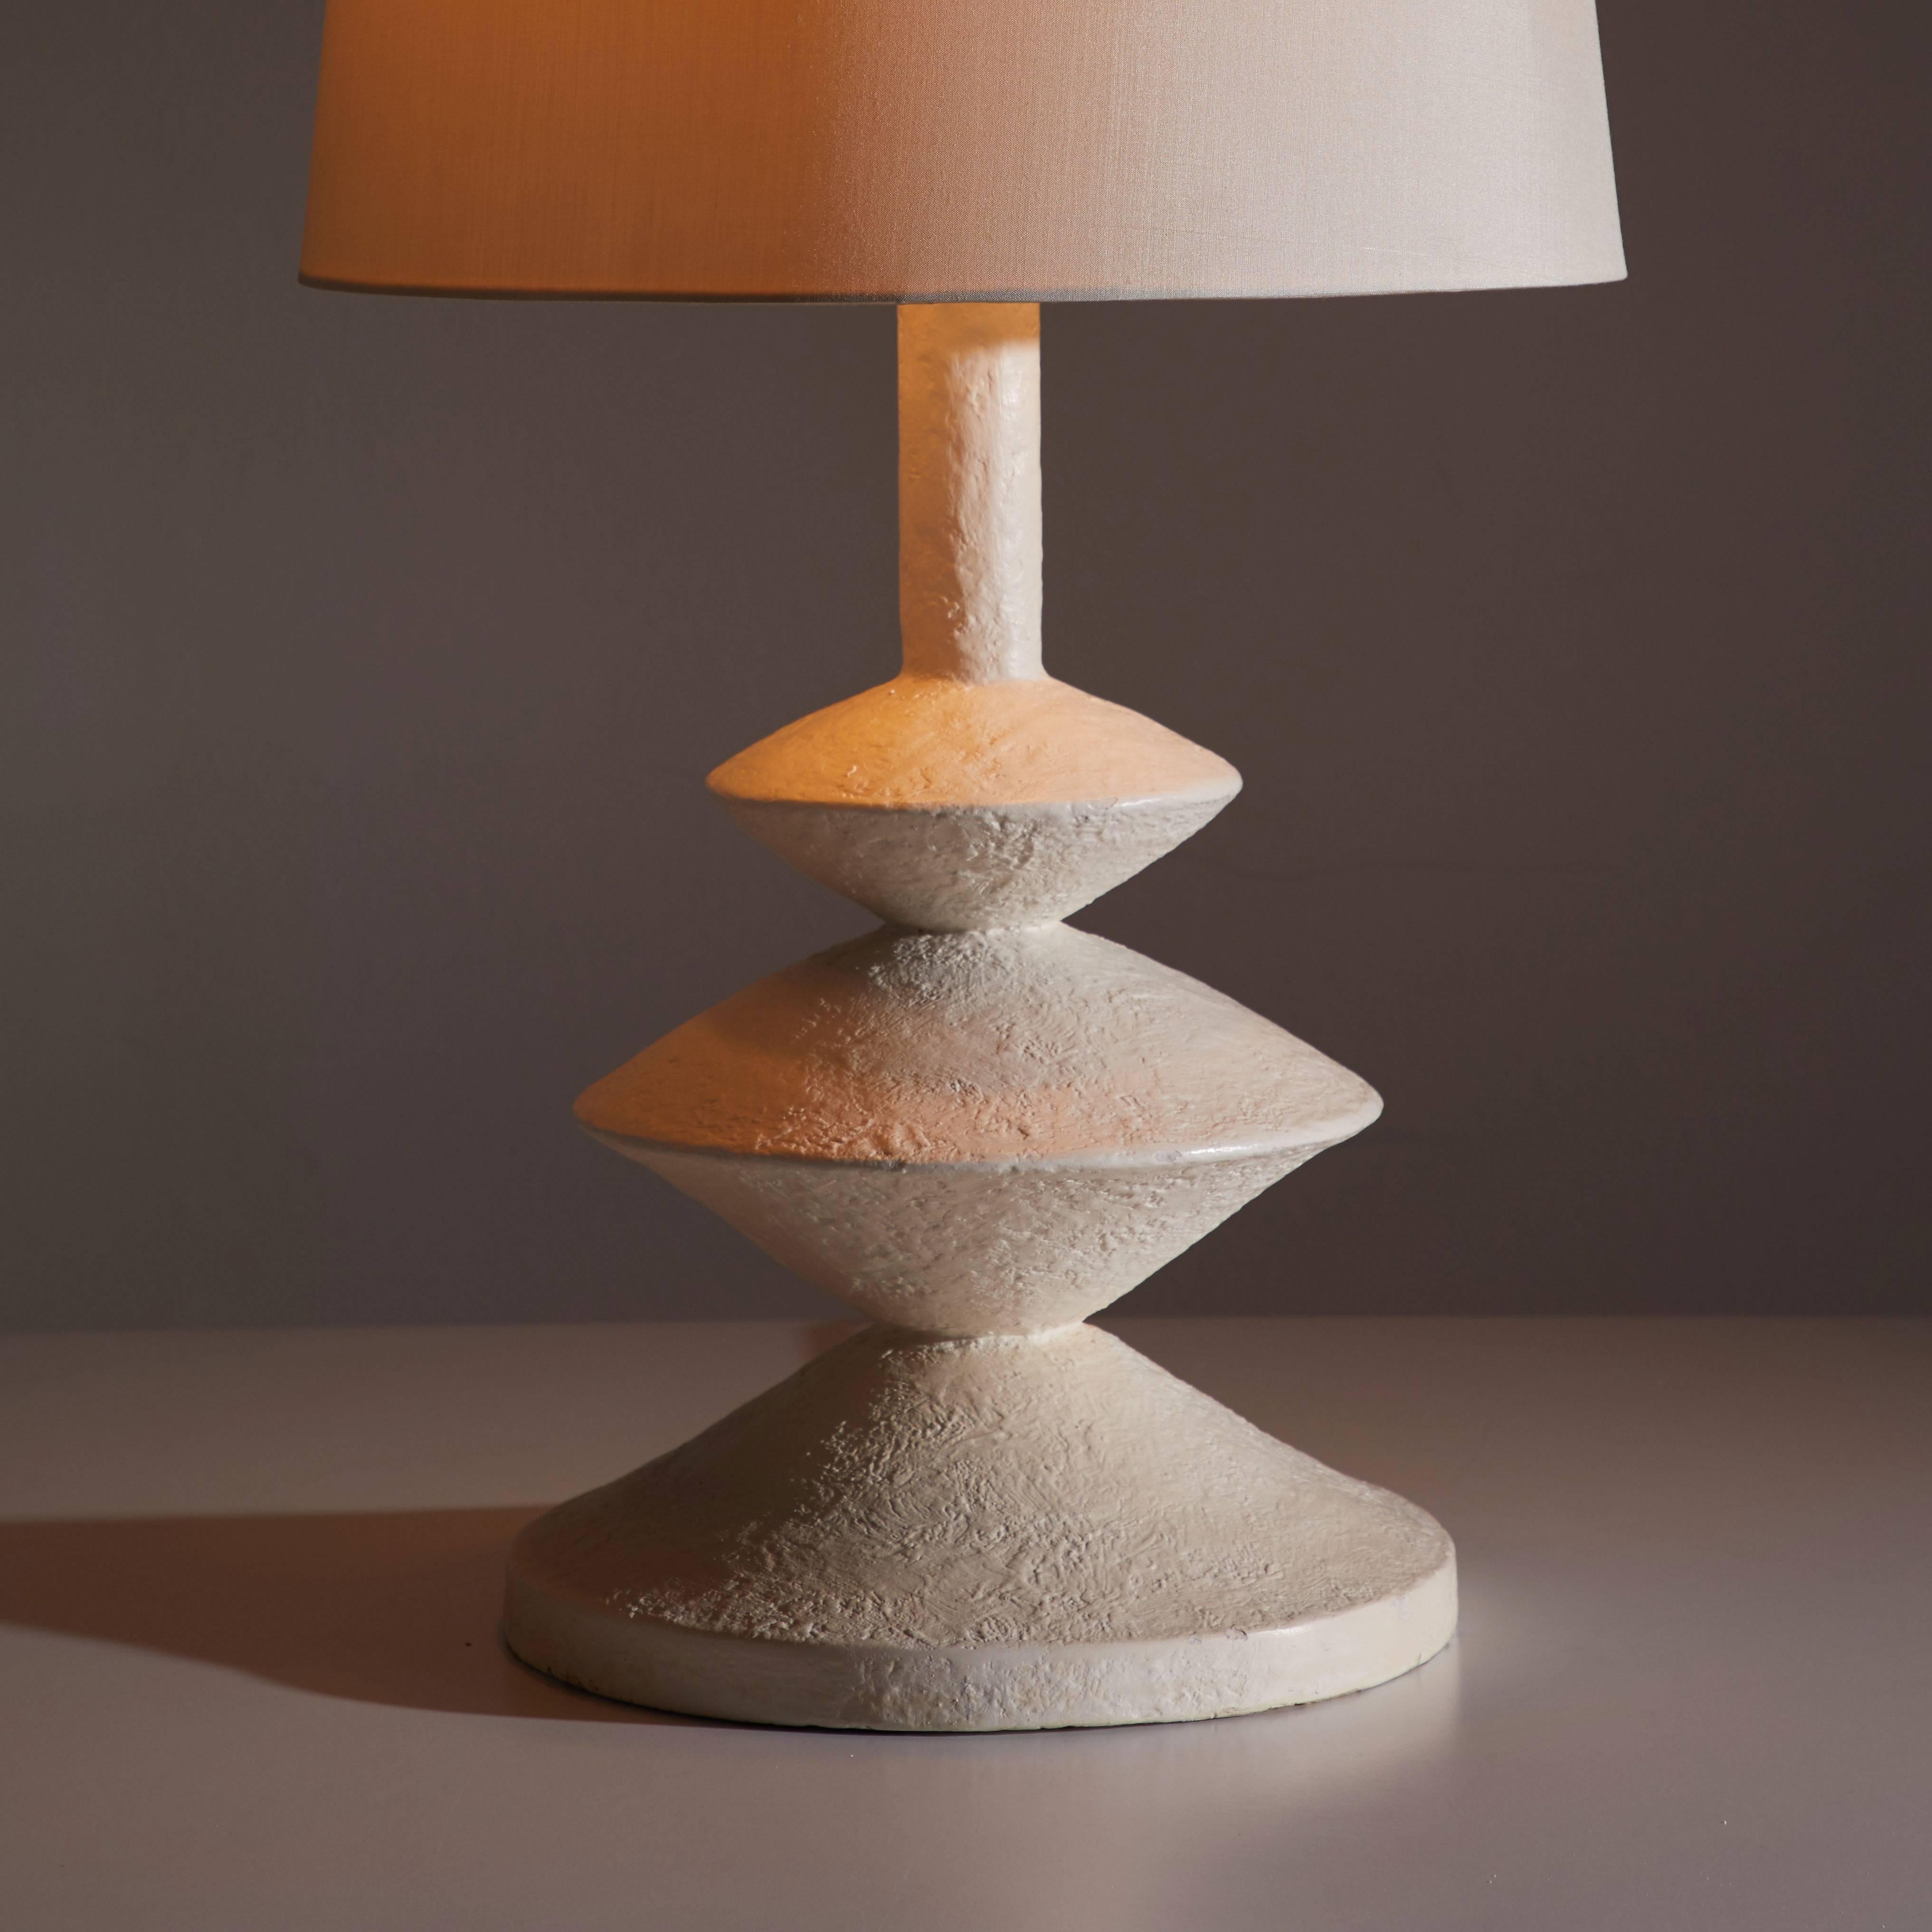 Single table lamp after Jean Michel Frank and Giacometti for Sirmos.
Manufactured in New York, circa 1970s. Original cord. Shade for display purposes only, not included. Custom shade fabrication available. Two 75w E-26.